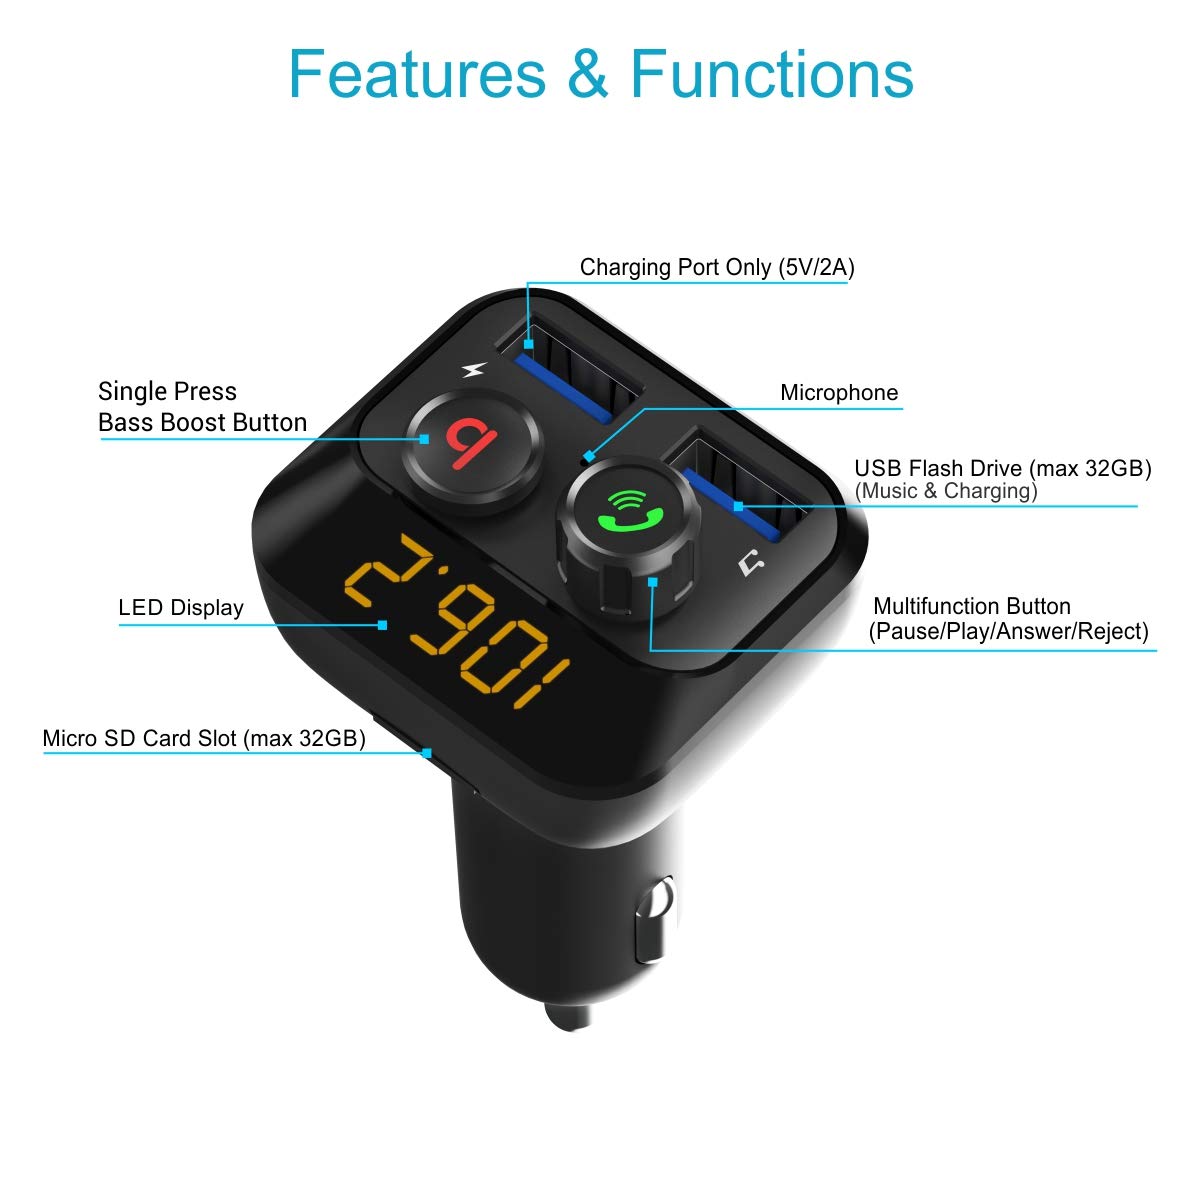 VeeDee Tvara T60 Bluetooth FM Transmitter Wireless Bluetooth Car Adapter,  AUX Radio Receiver, Handsfree Call, USB & Type-C Car Charger, 7 Color